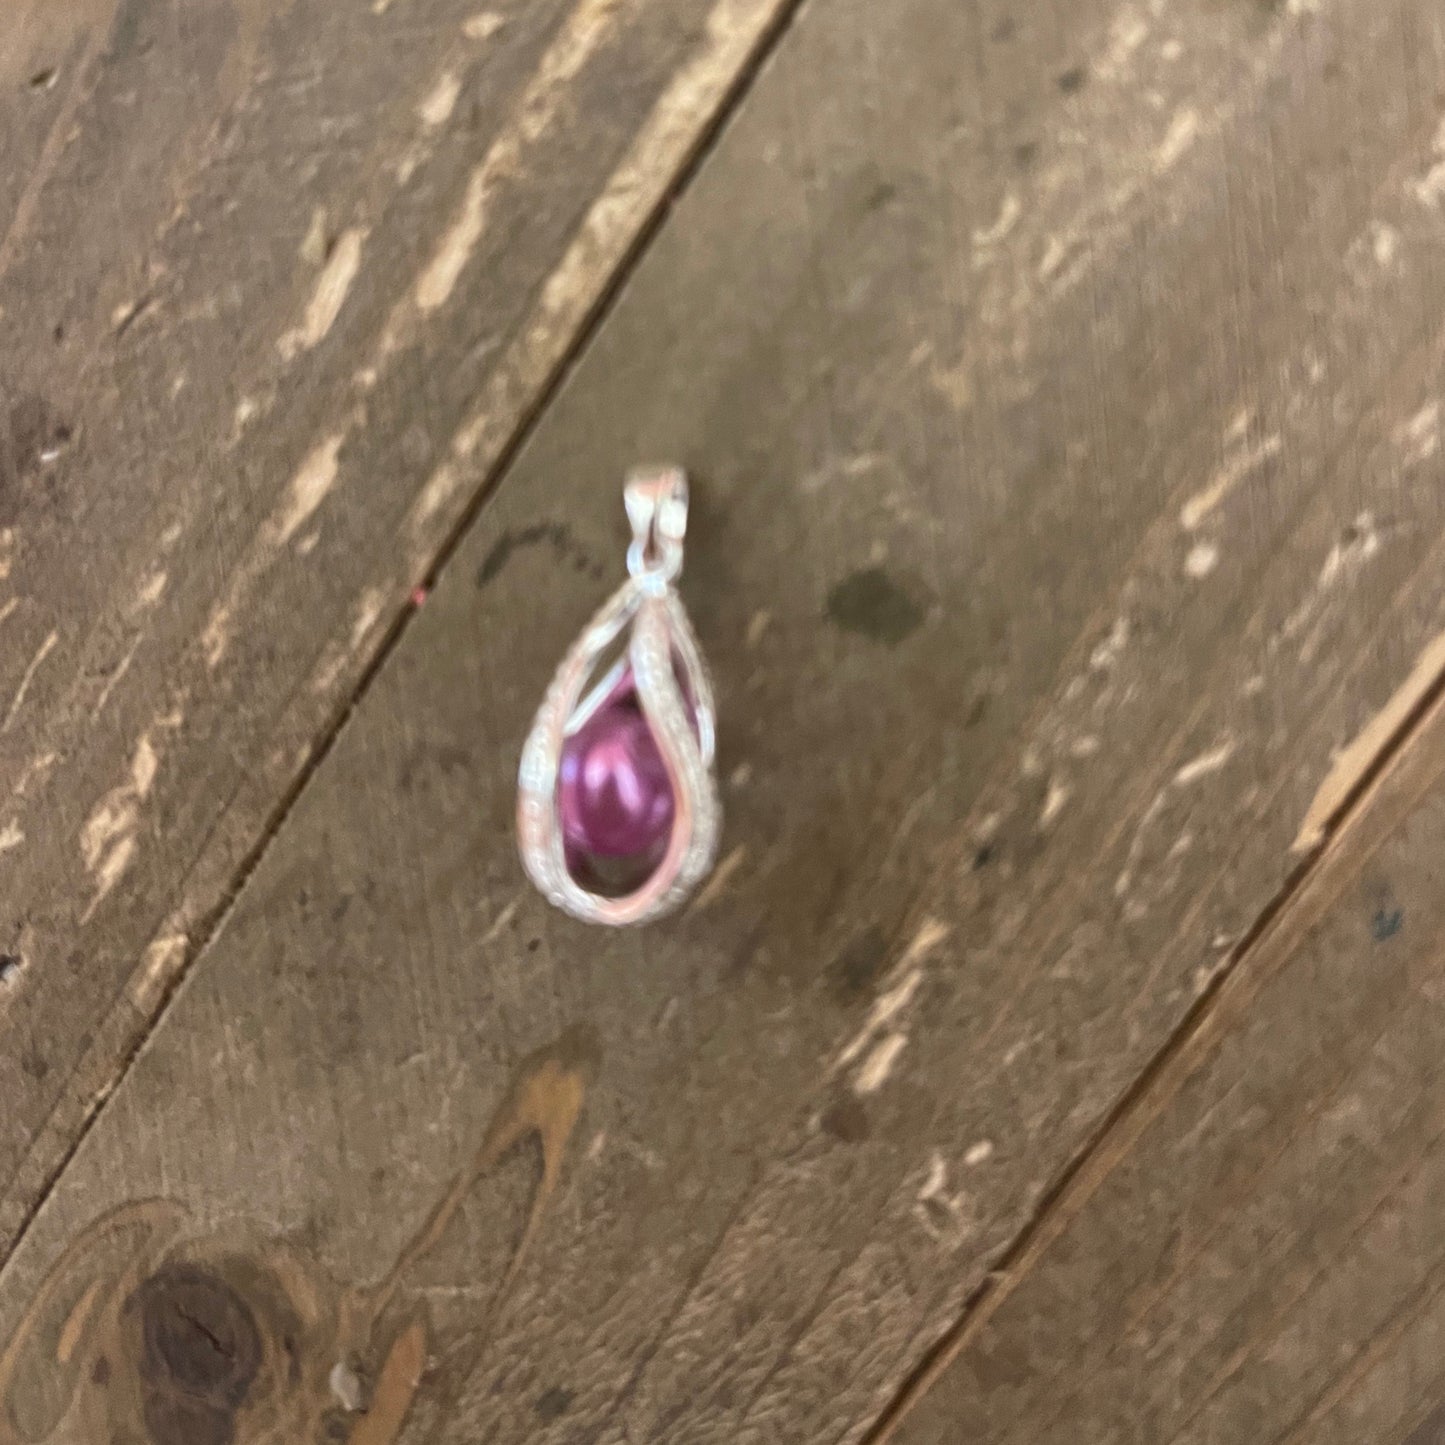 Water Drop Twist Pearl Cag  Pendant on a Silver ChainPink tiful of LOVE